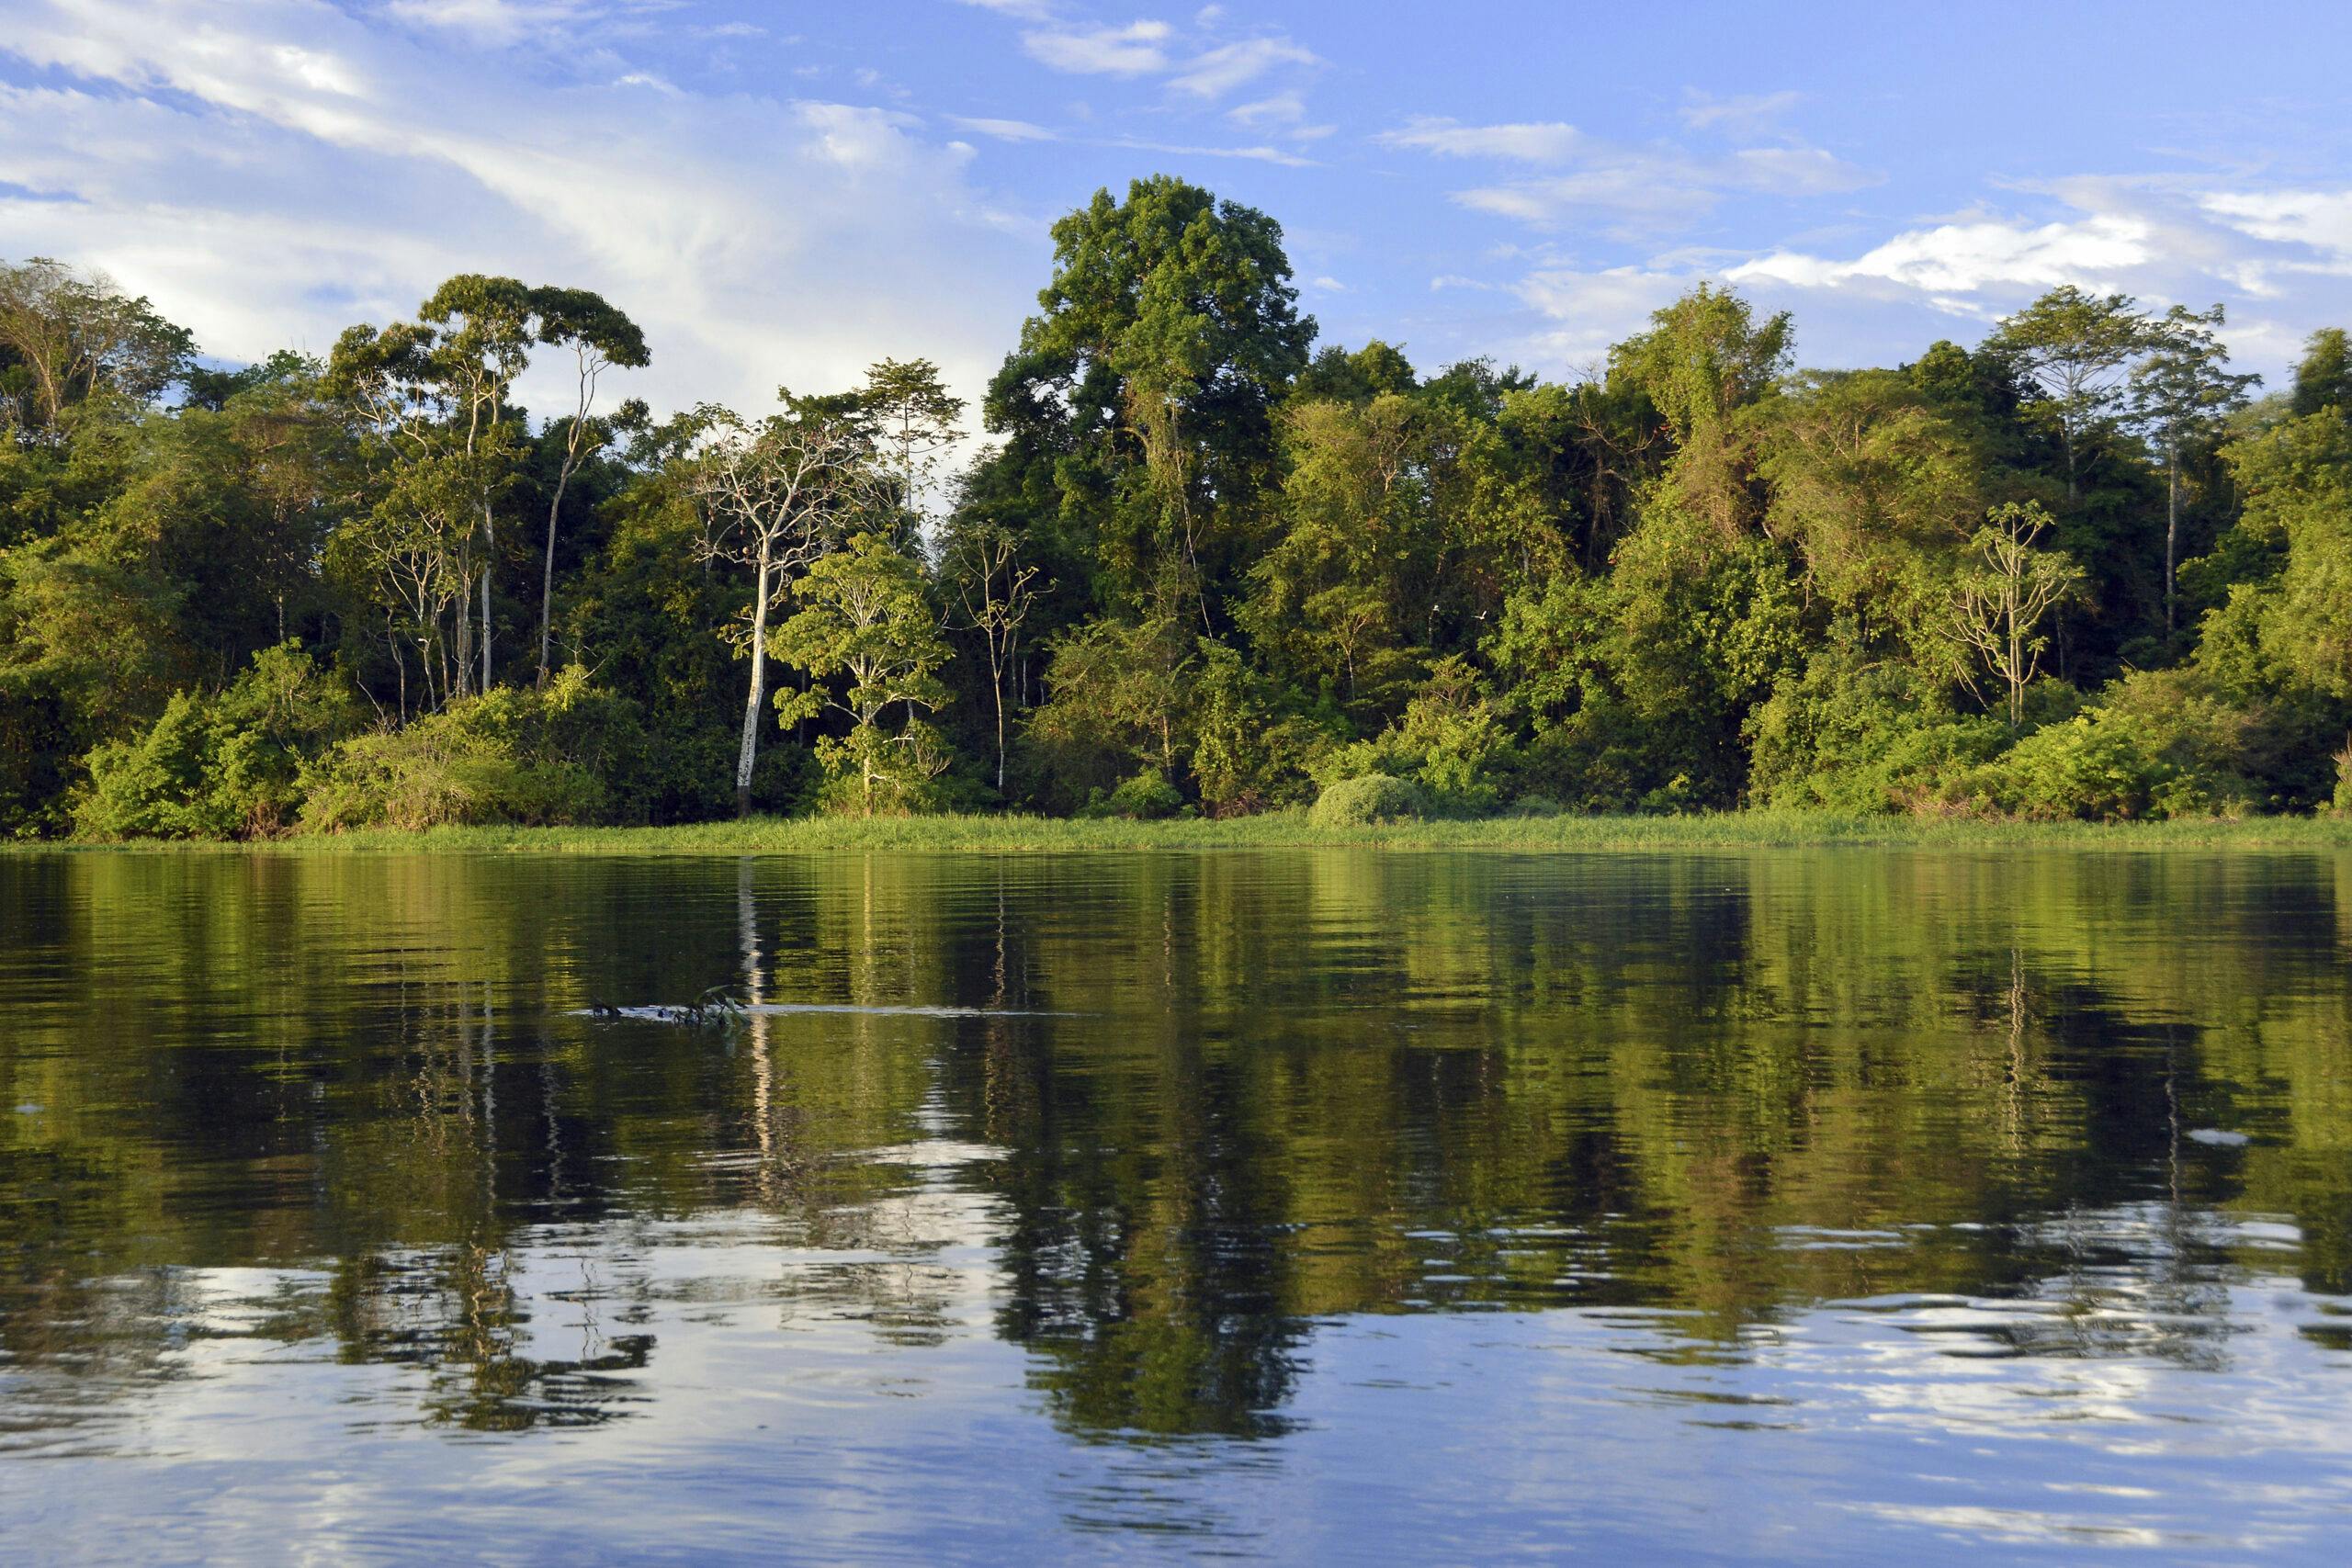 Bank of the Rio Solimoes river with flooded Varzea forest, Mamiraua National Park, Manaus, Amazonas, Brazil